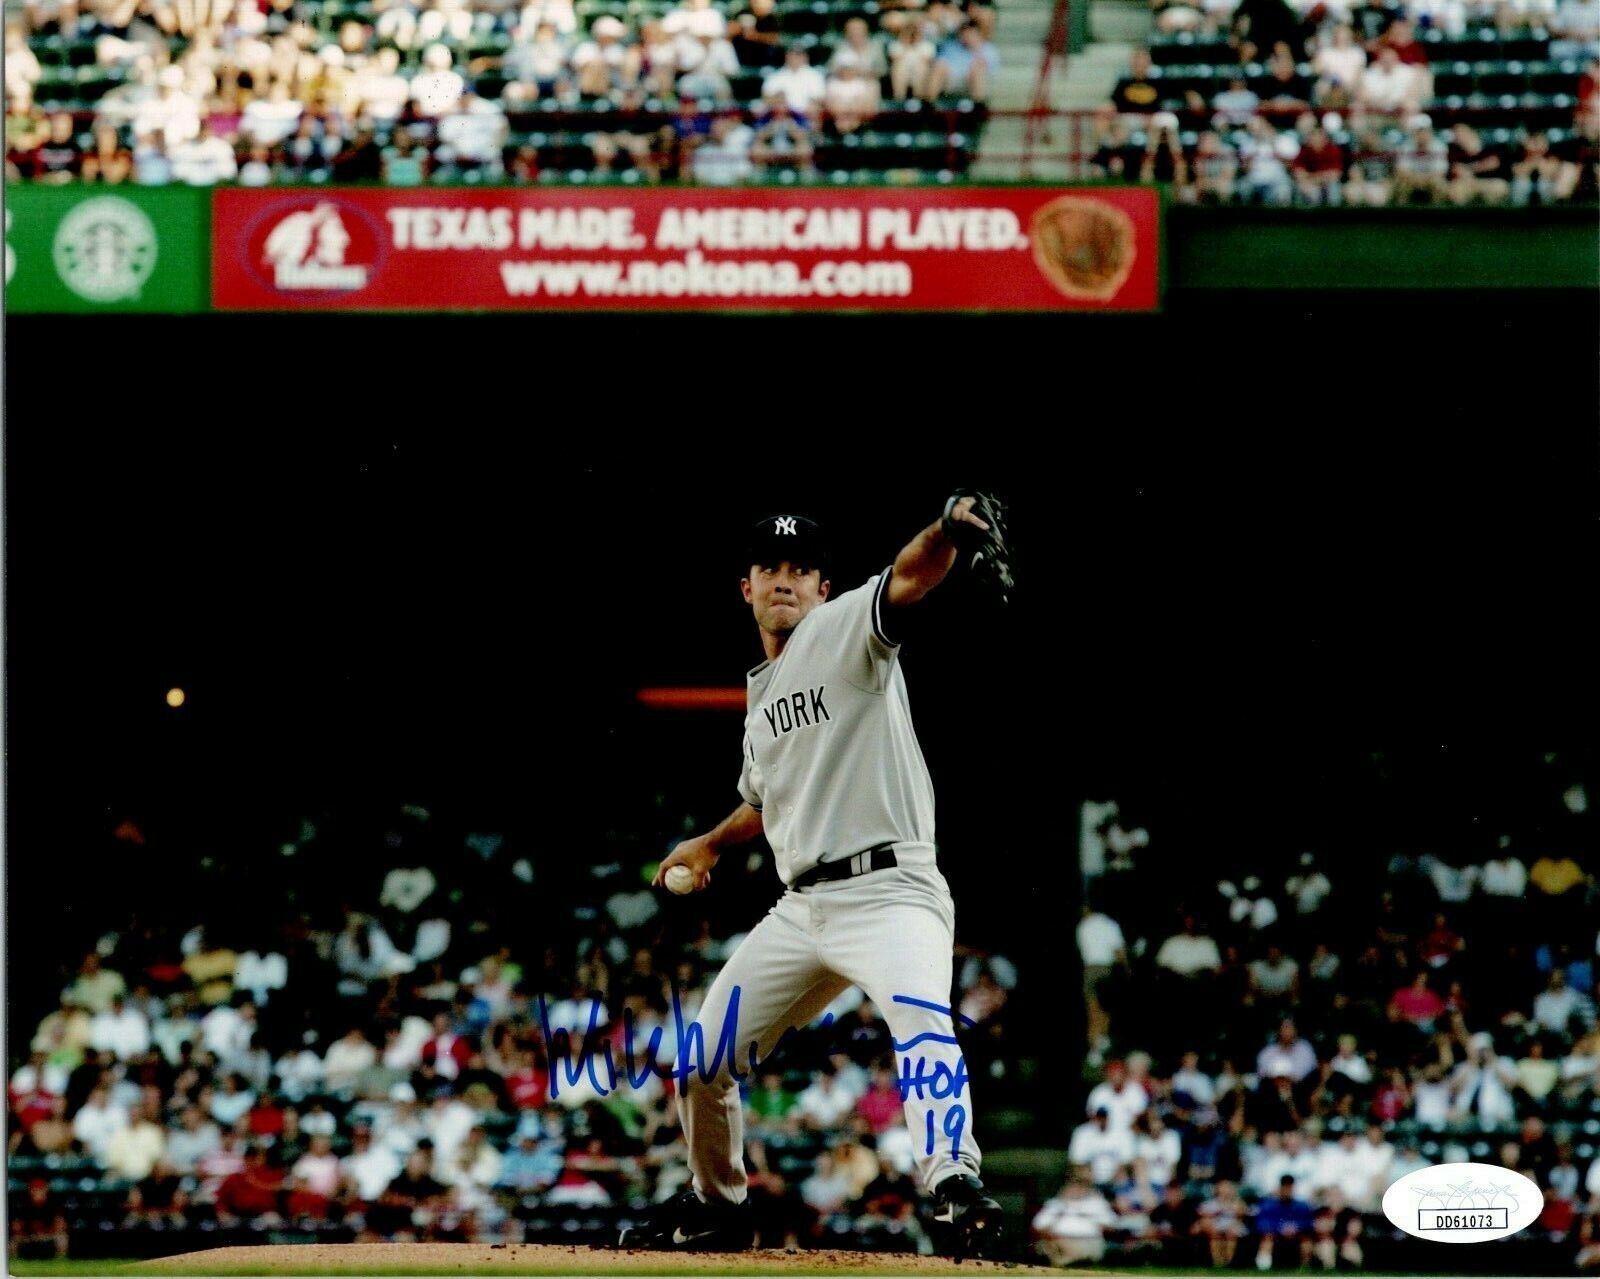 Mike Mussina Yankees Pitcher HOF 2019 Autographed 8x10 Photo JSA